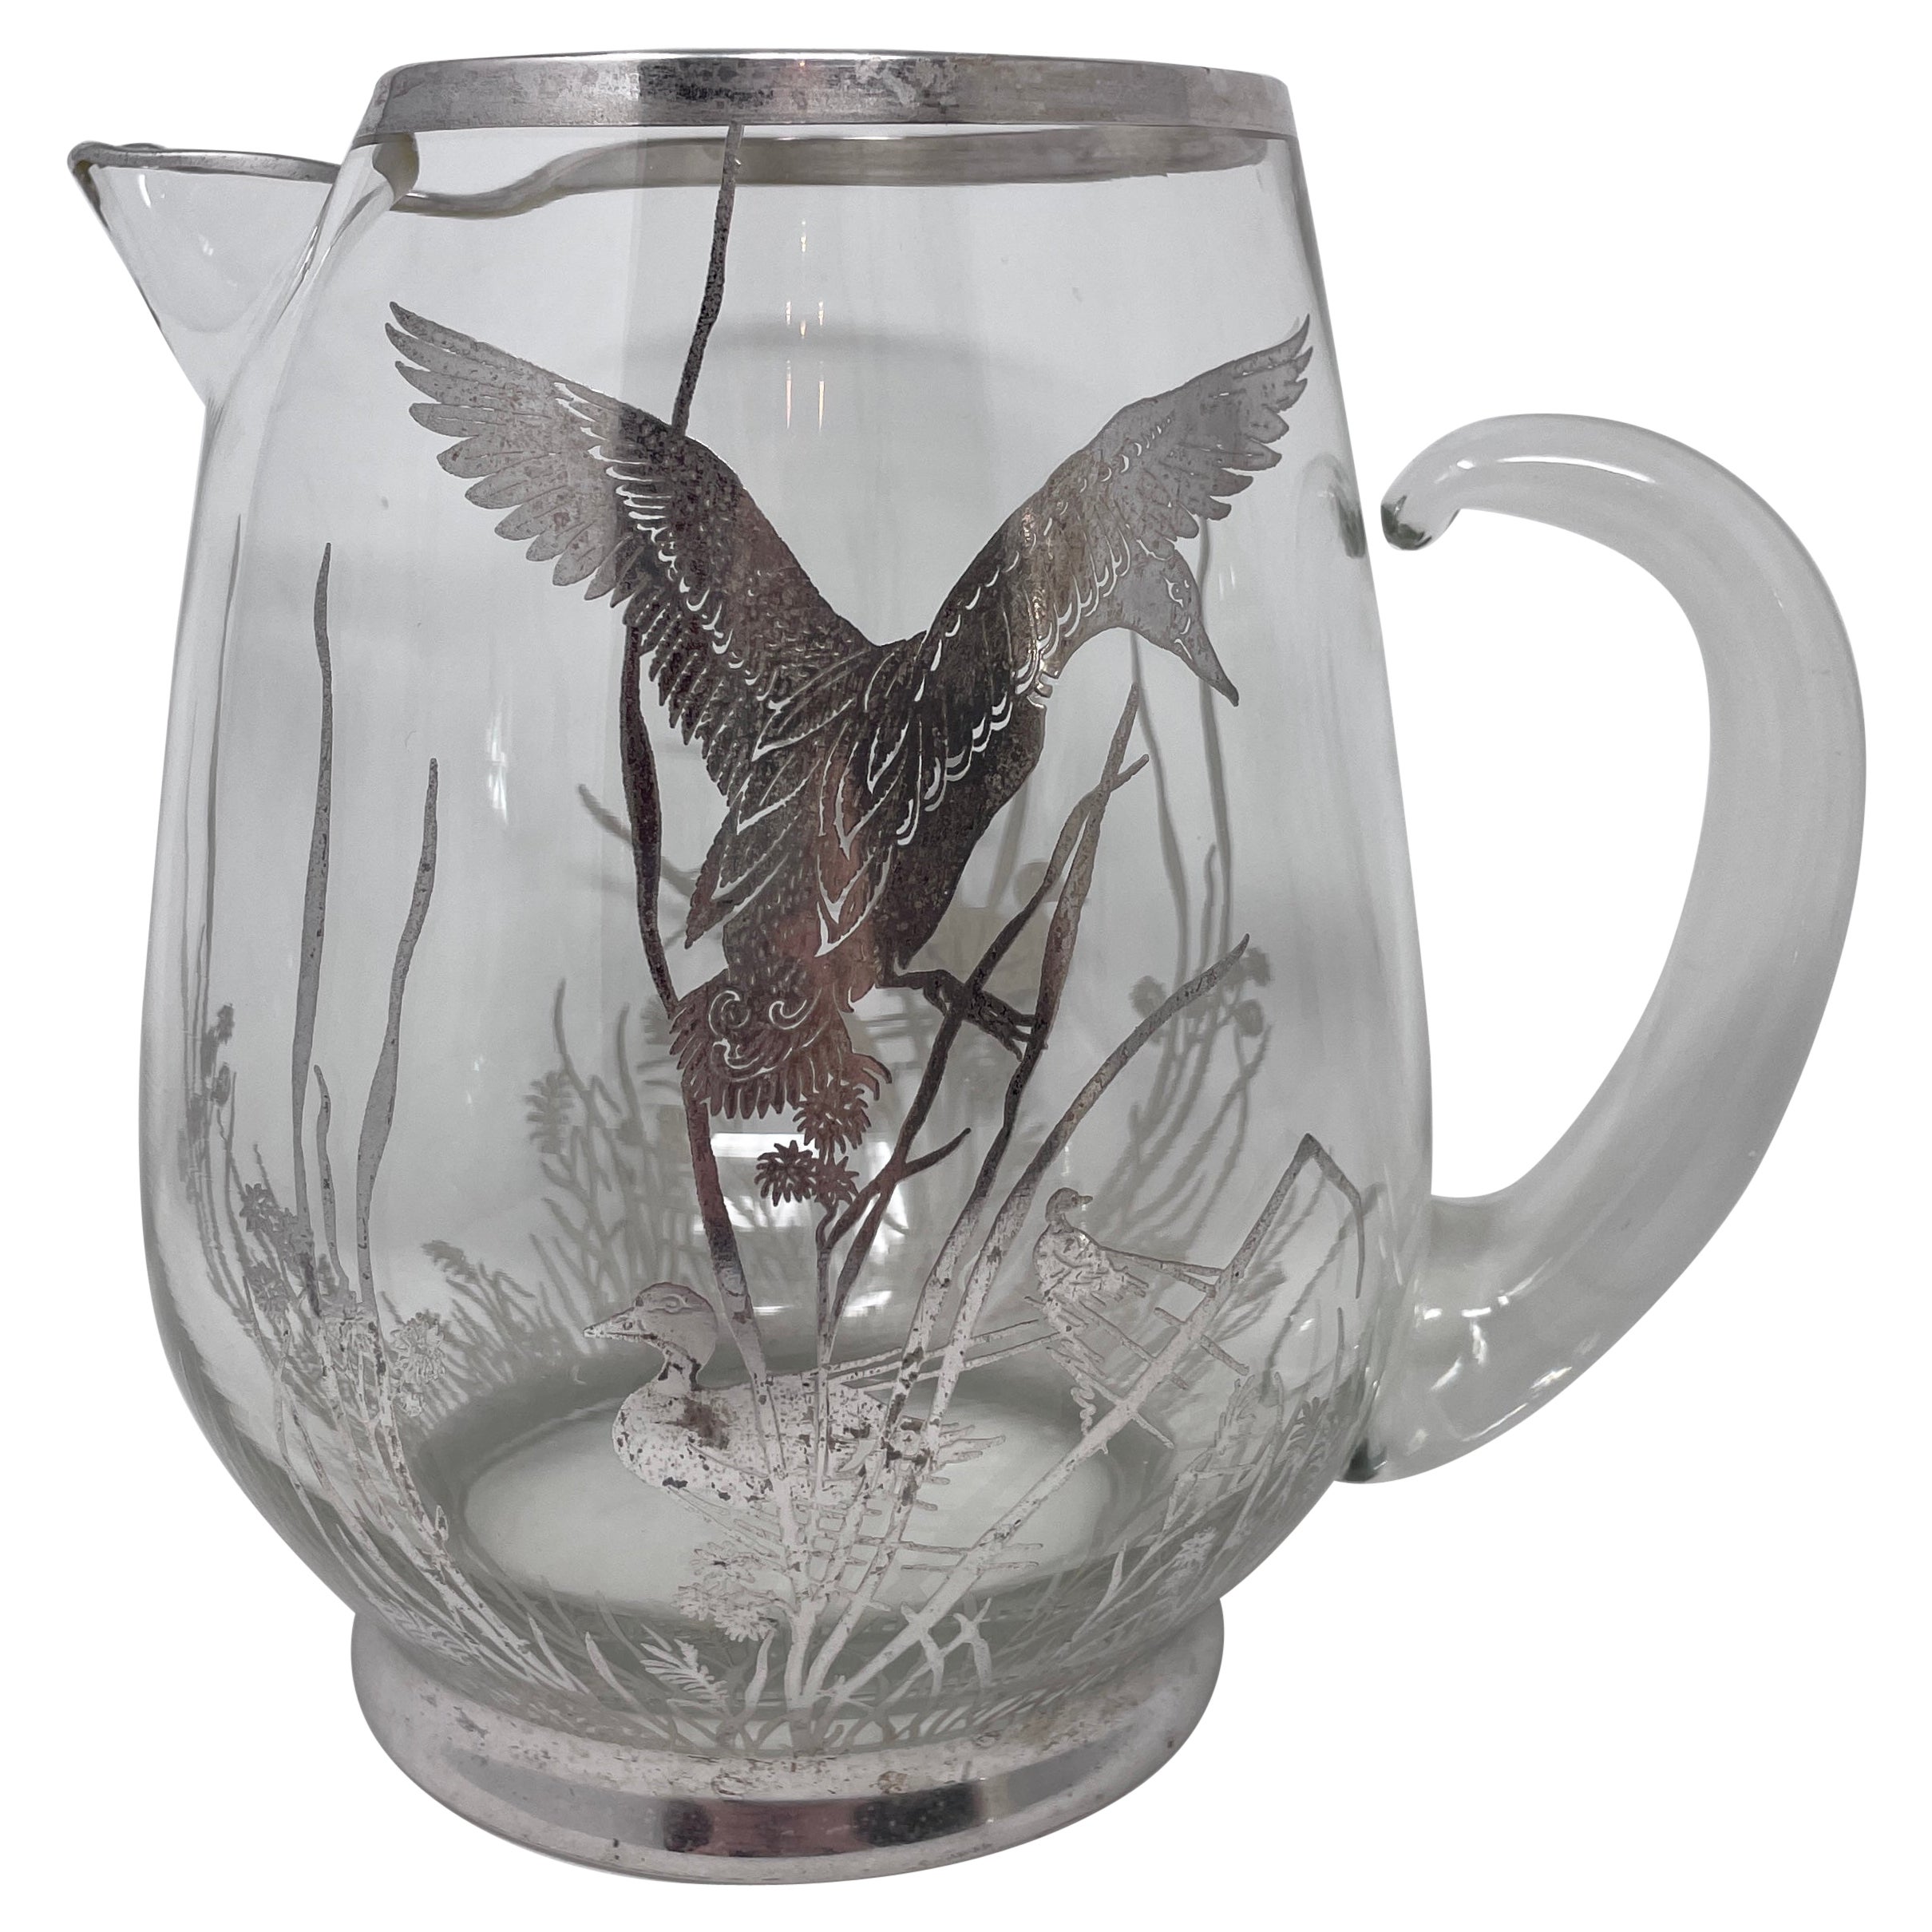 Estate Art Deco Silvered Cut Crystal Cocktail Pitcher with Birds, circa 1930s